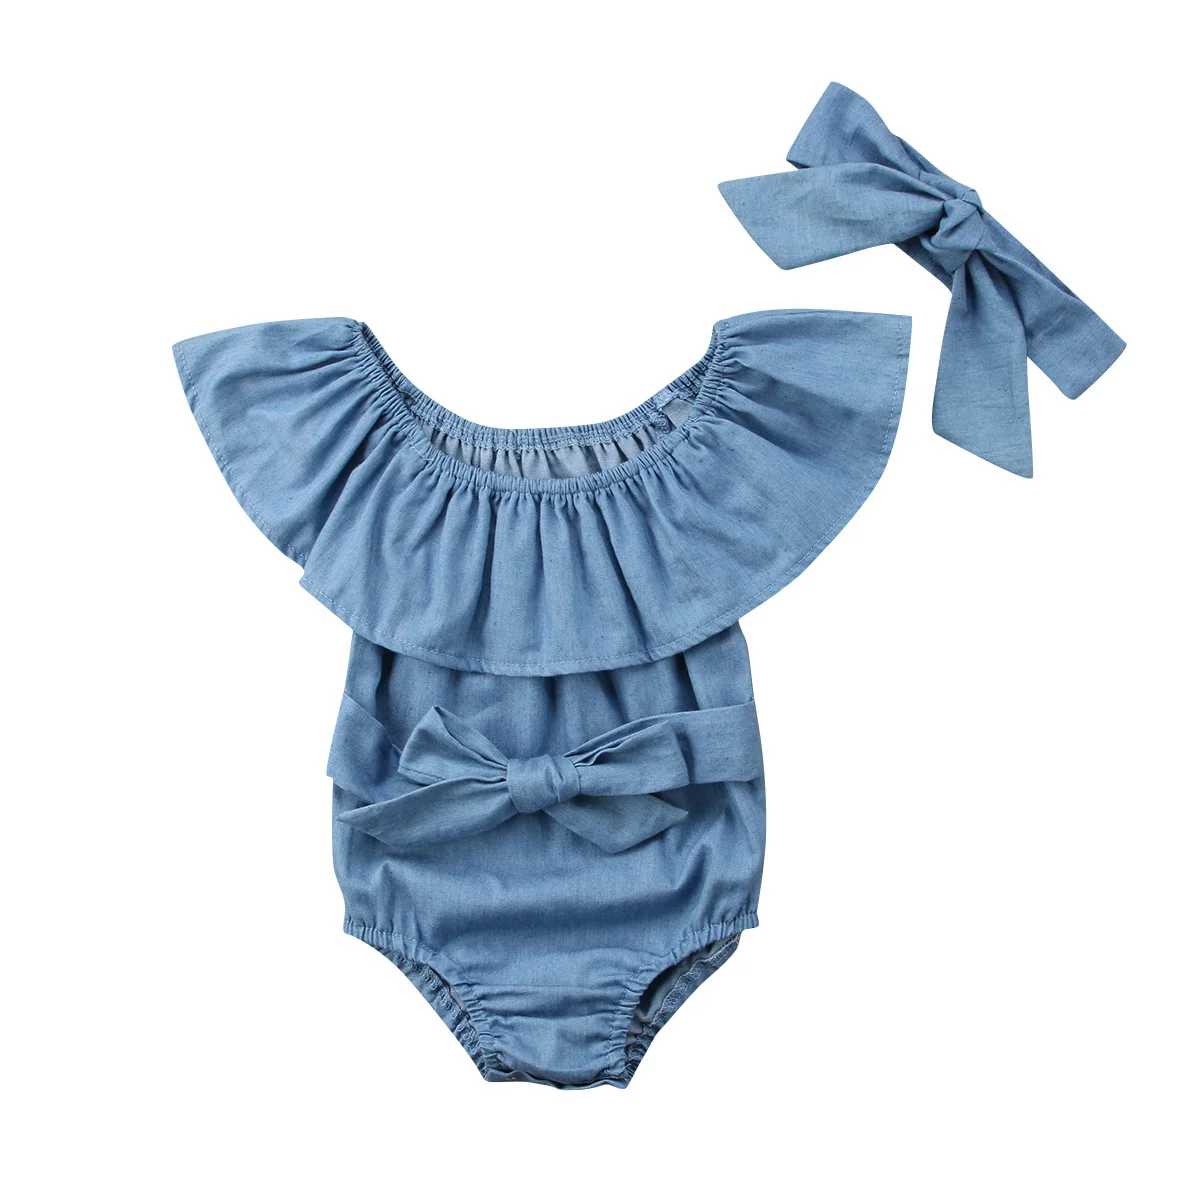 

Newborn Infant Baby Girl Ruffle Neck Front Bowknot Bodysuits Jumpsuits+Headband Outfits 2Pcs Summer Clothes Sunsuit 0-24M